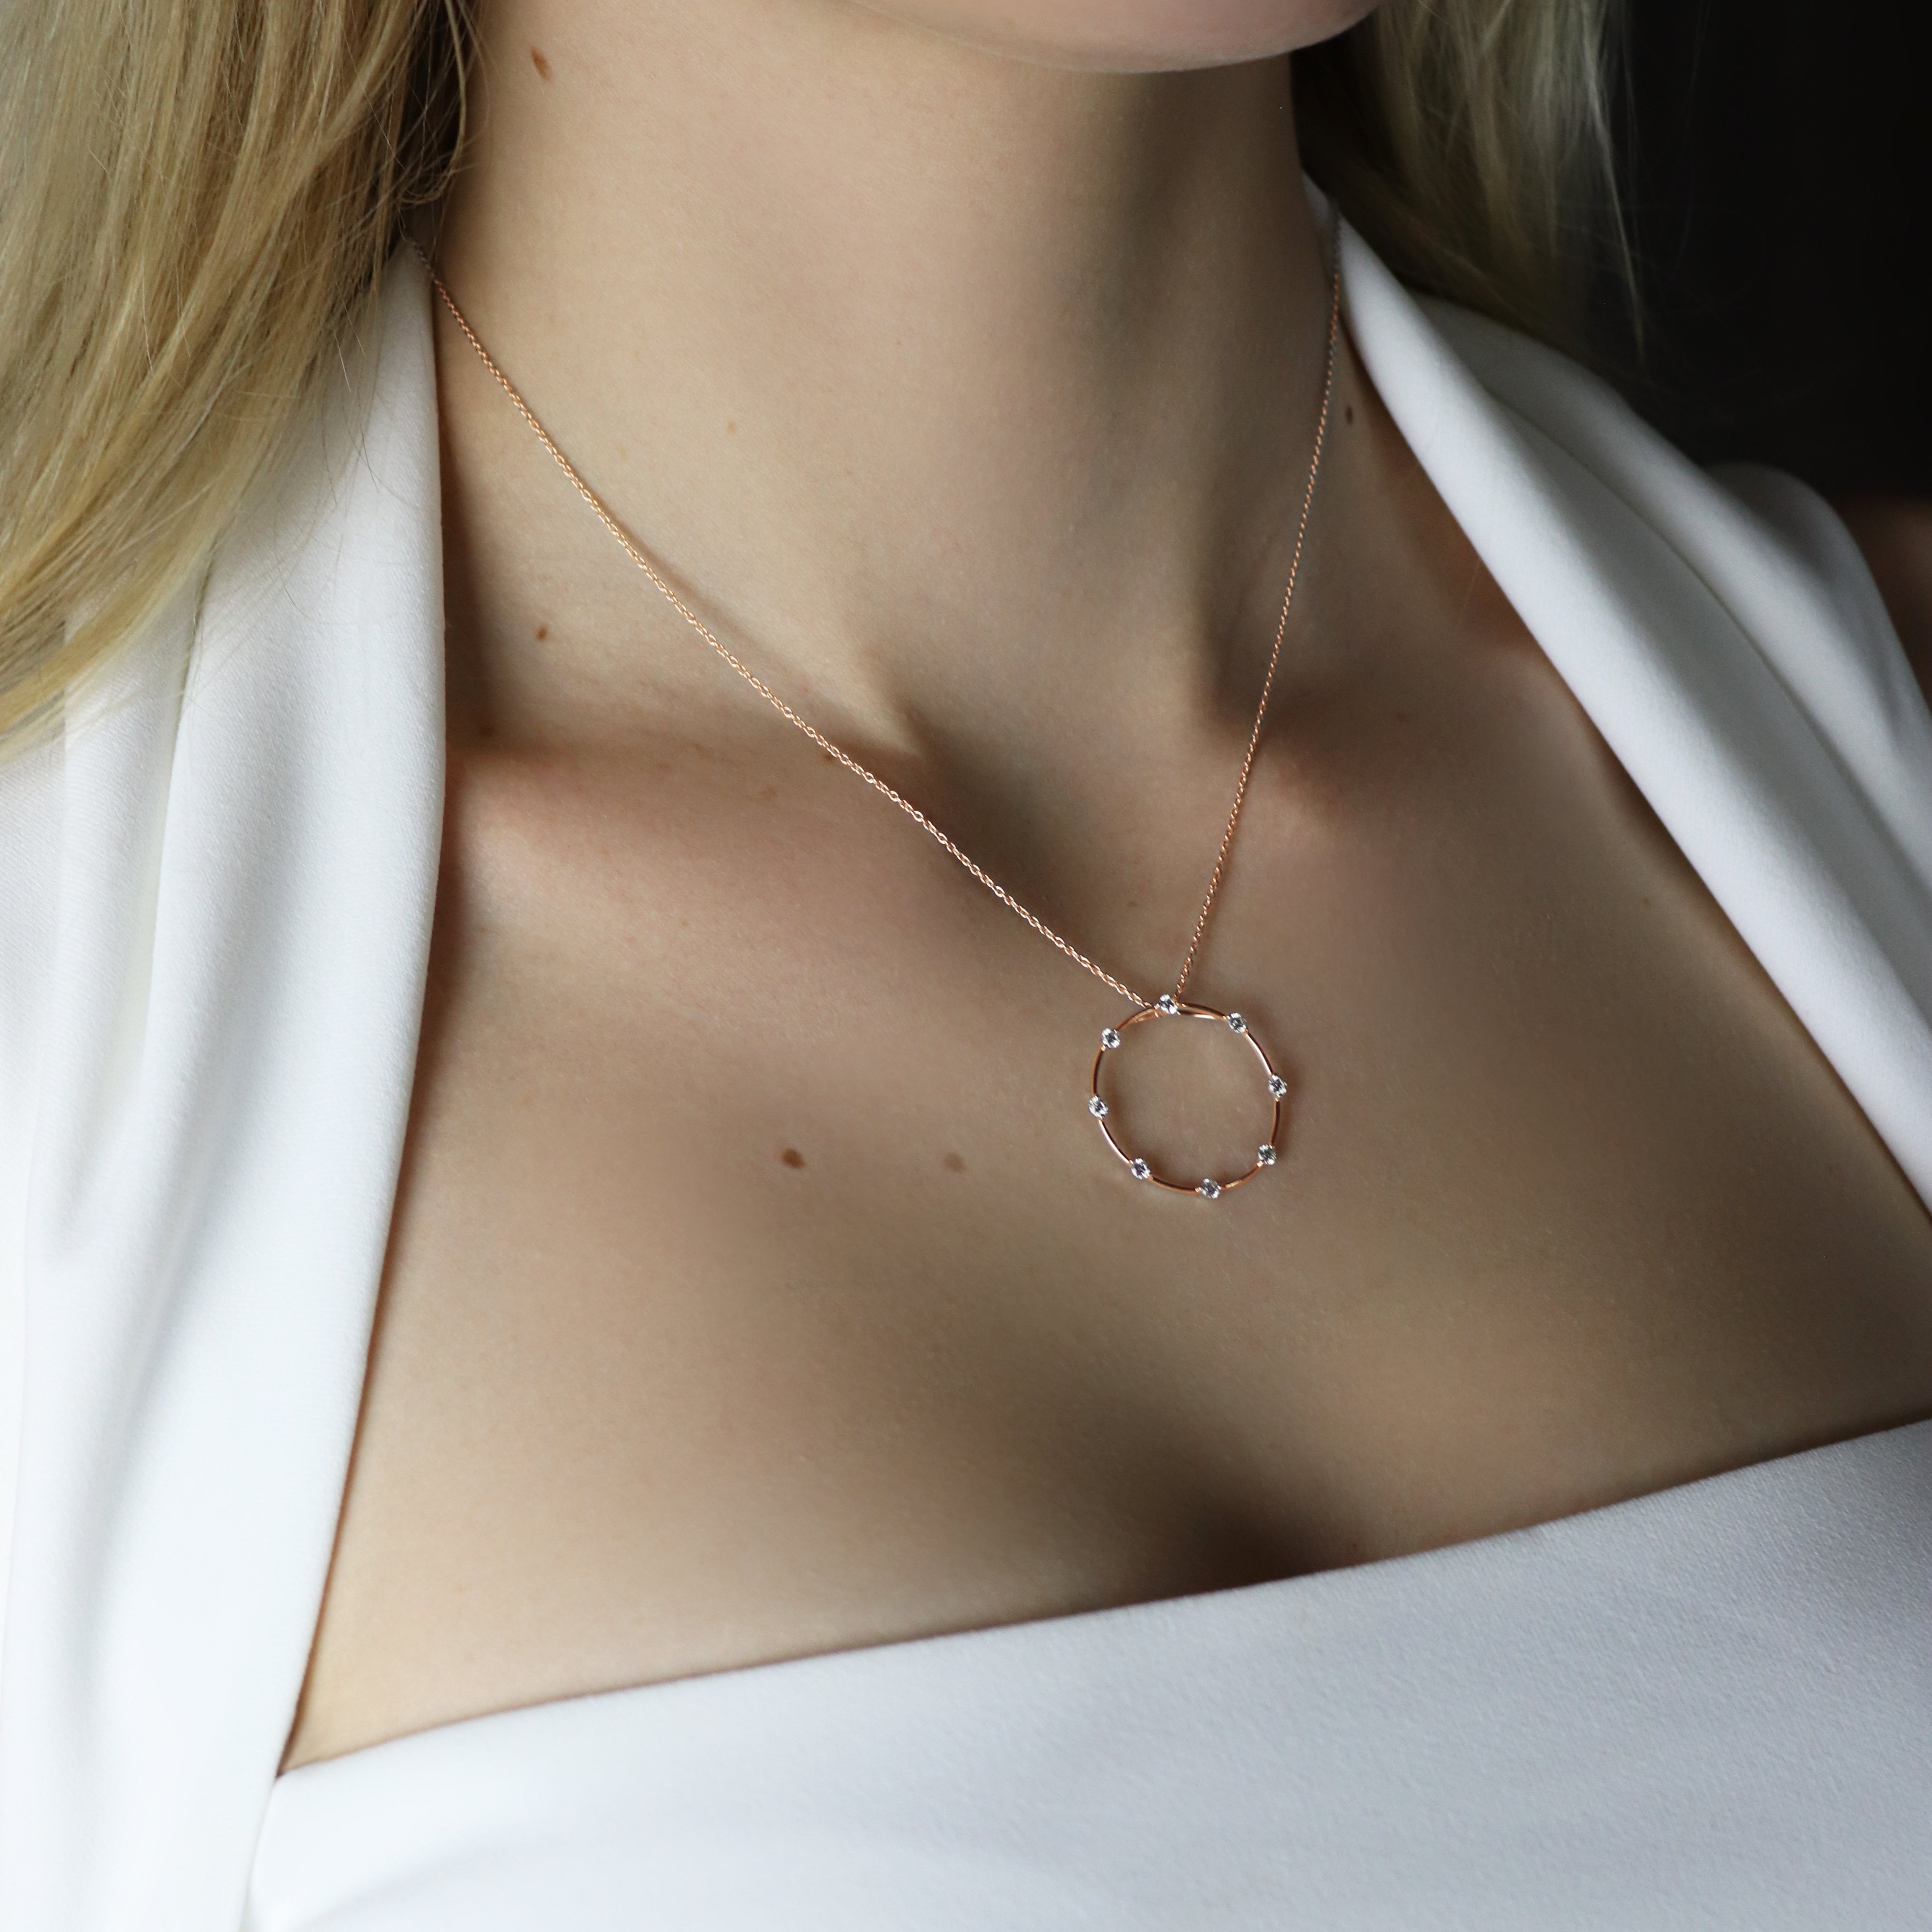 Rose Gold Interlocking Circles Necklace - All The Falling Stars